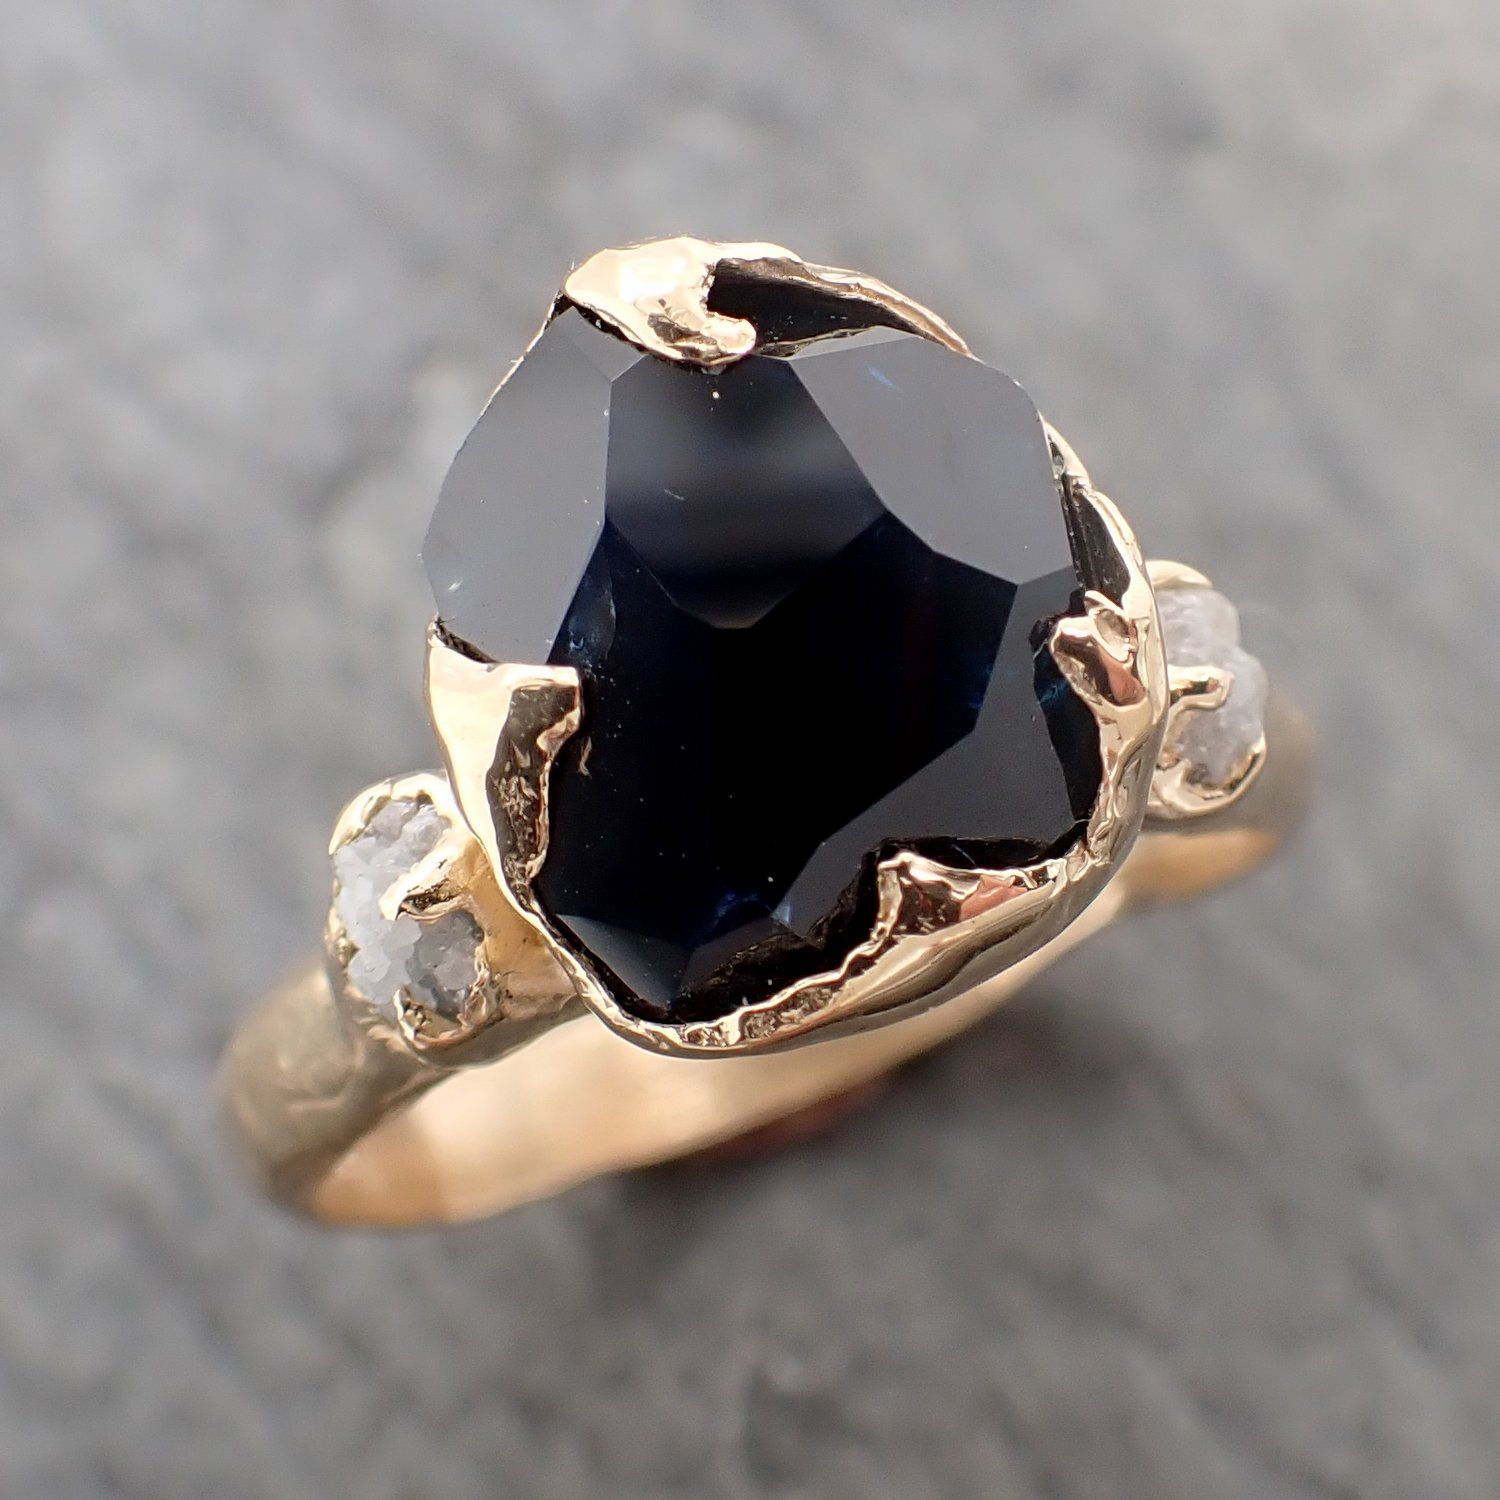 partially faceted sapphire natural sapphire gemstone raw rough diamond 18k yellow gold engagement ring multi stone 2291 Alternative Engagement